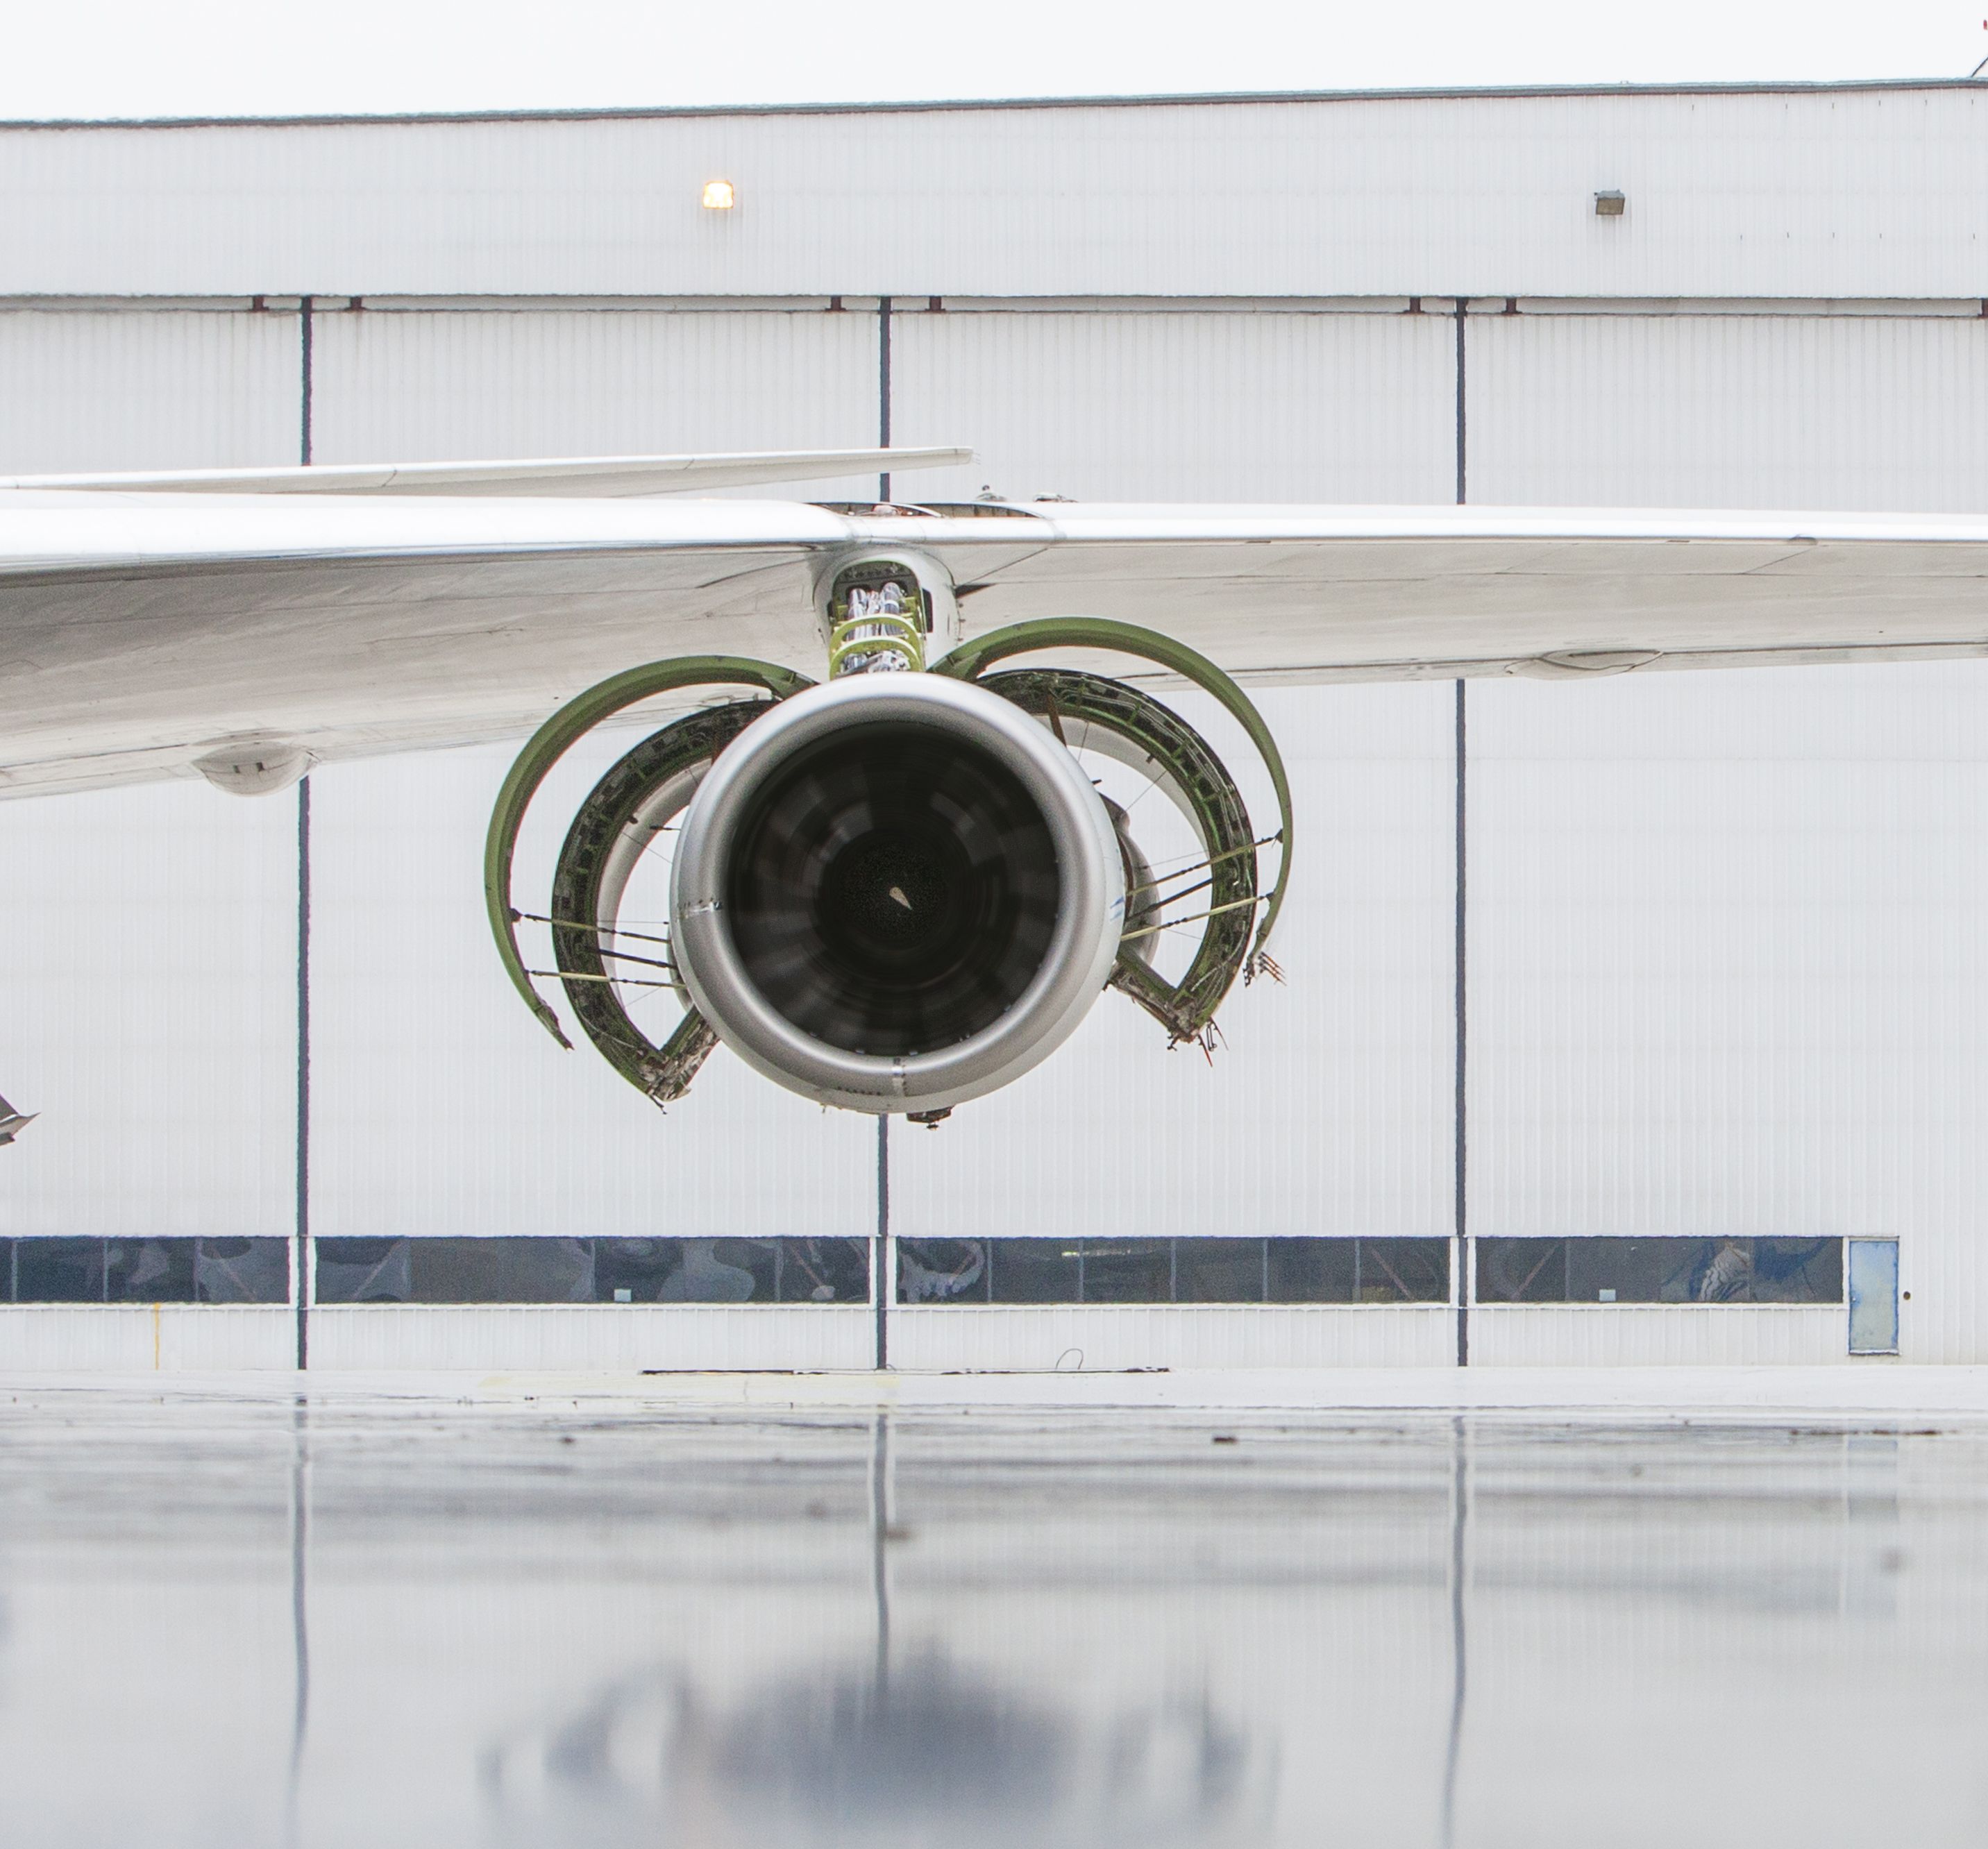 Pratt & Whitney GTF engine fixed to an aircraft wing